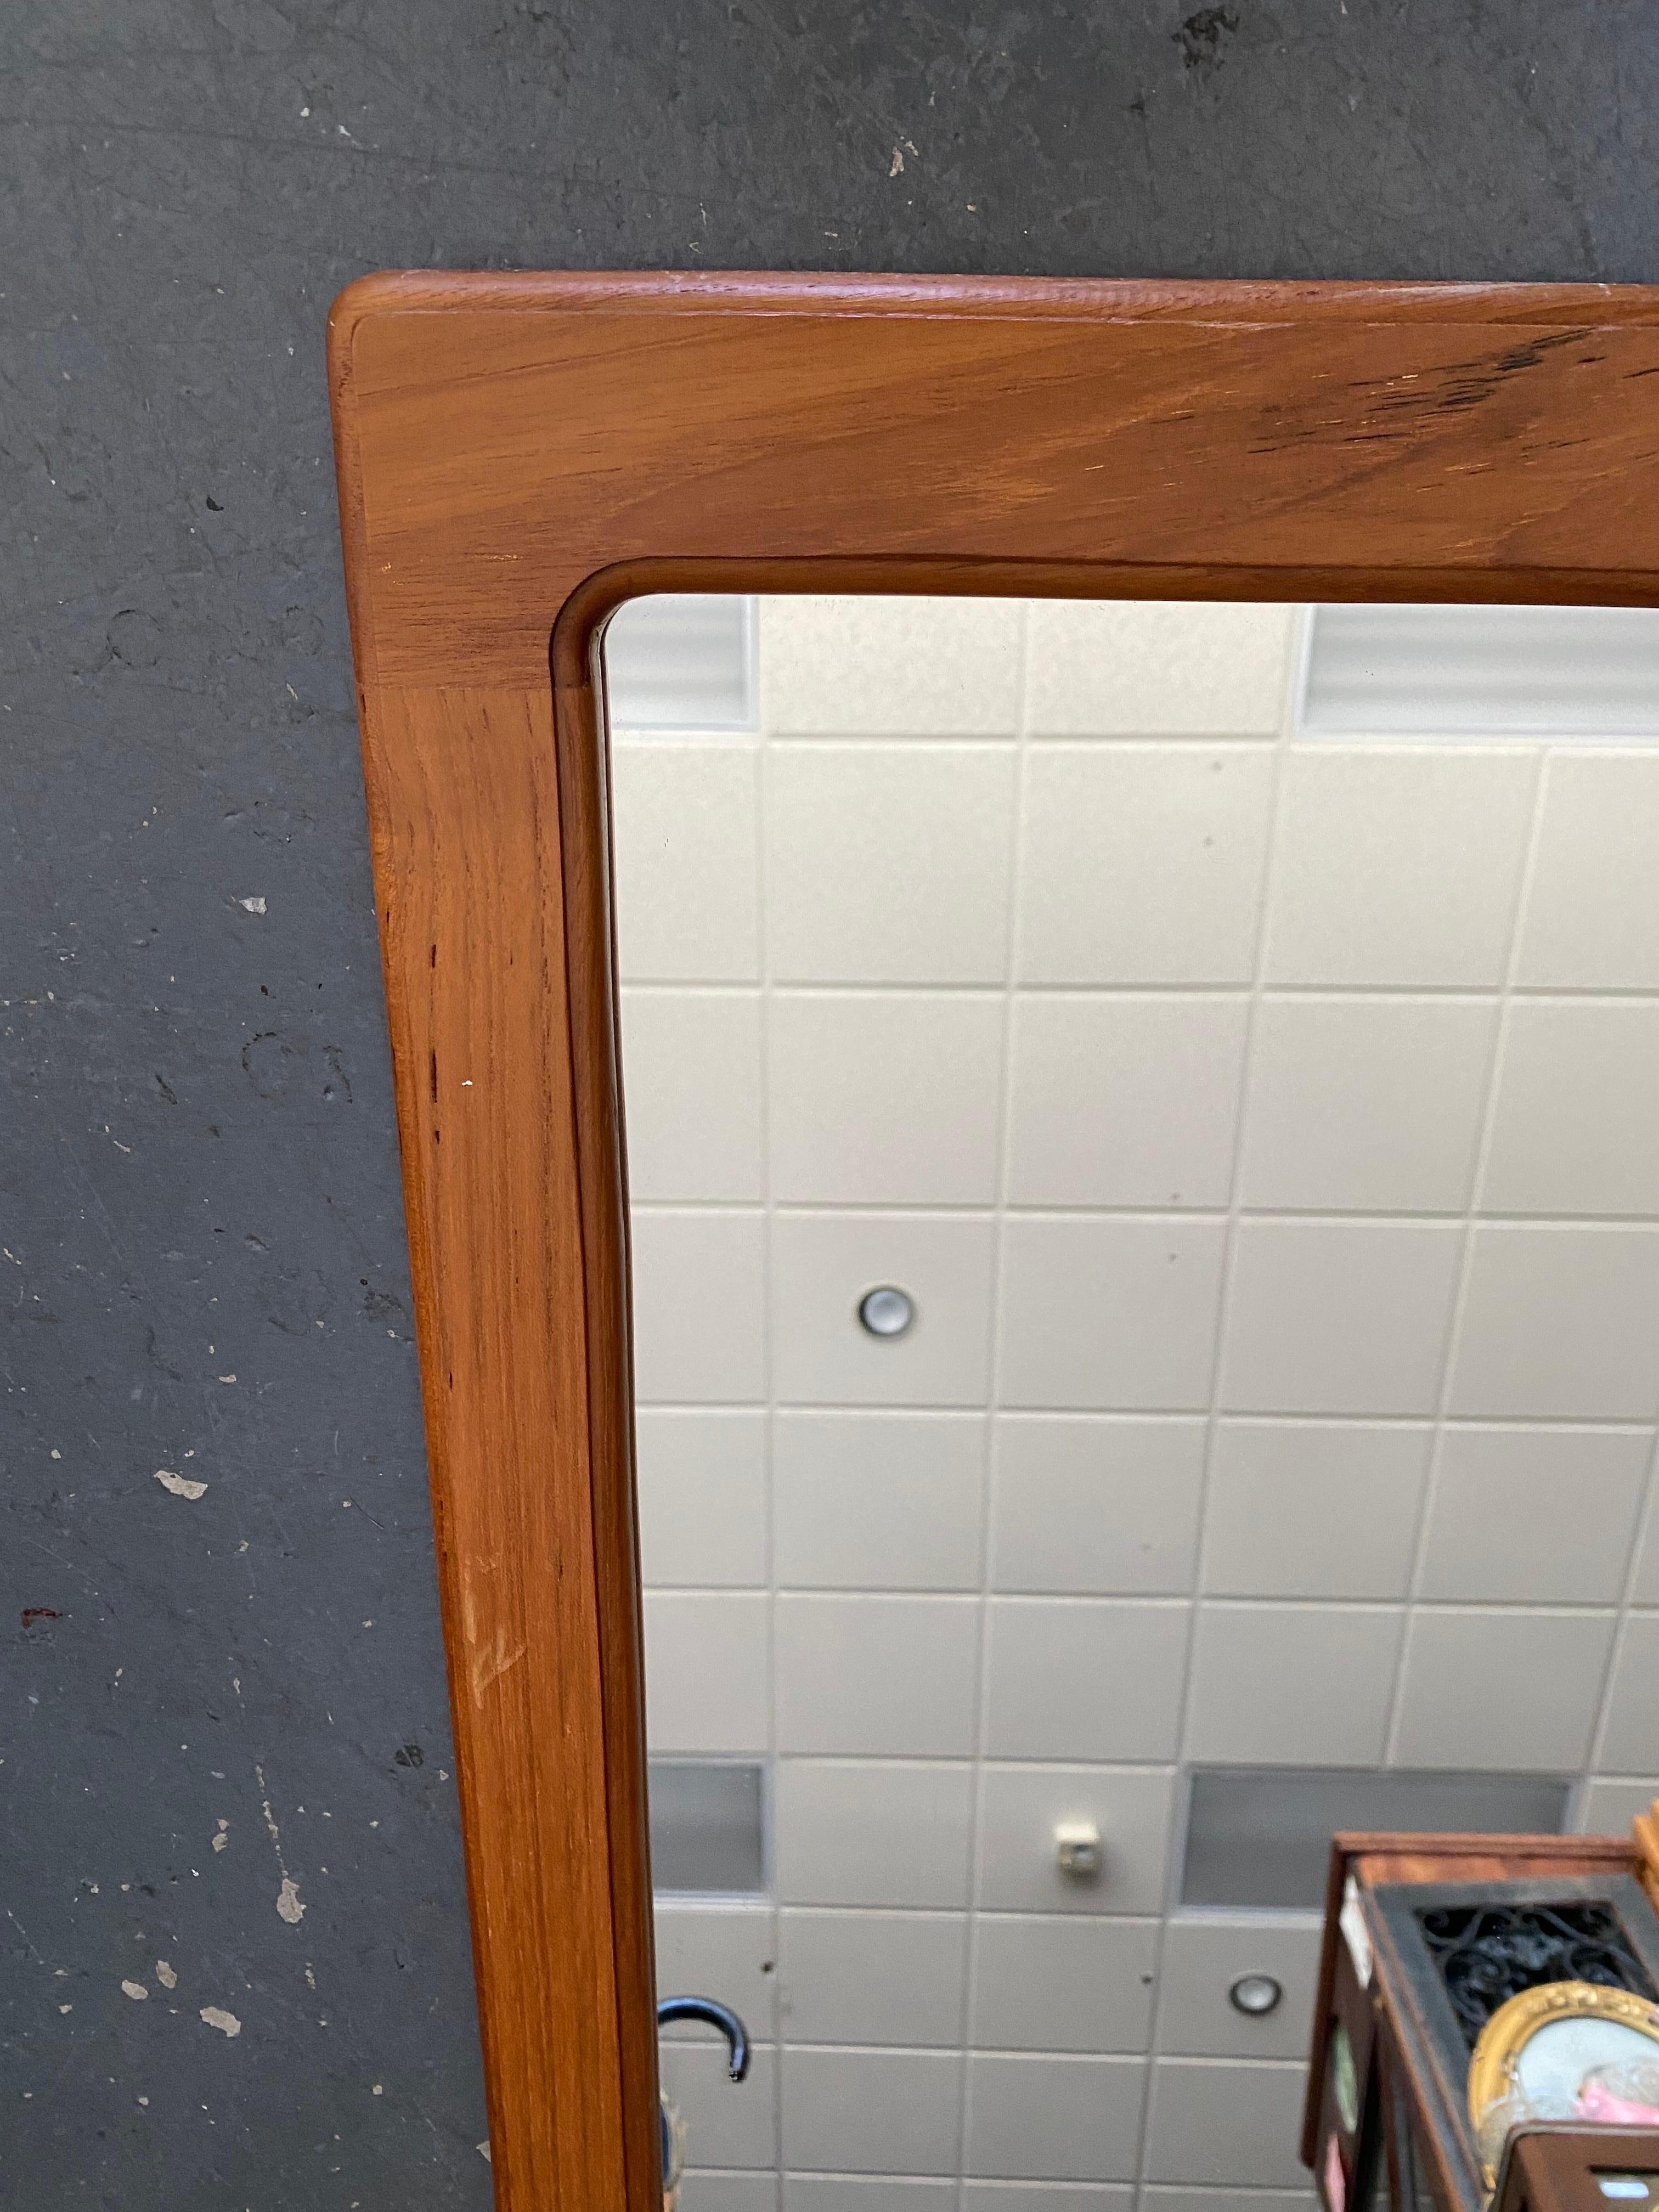 Beautiful Mid-Century Modern Danish teak wall mirror by Pedersen & Hansen. A compact mirror that combines function and style wherever displayed. Unique piece, don't miss out.

This mirror is in very good condition; the glass is scratch and crack